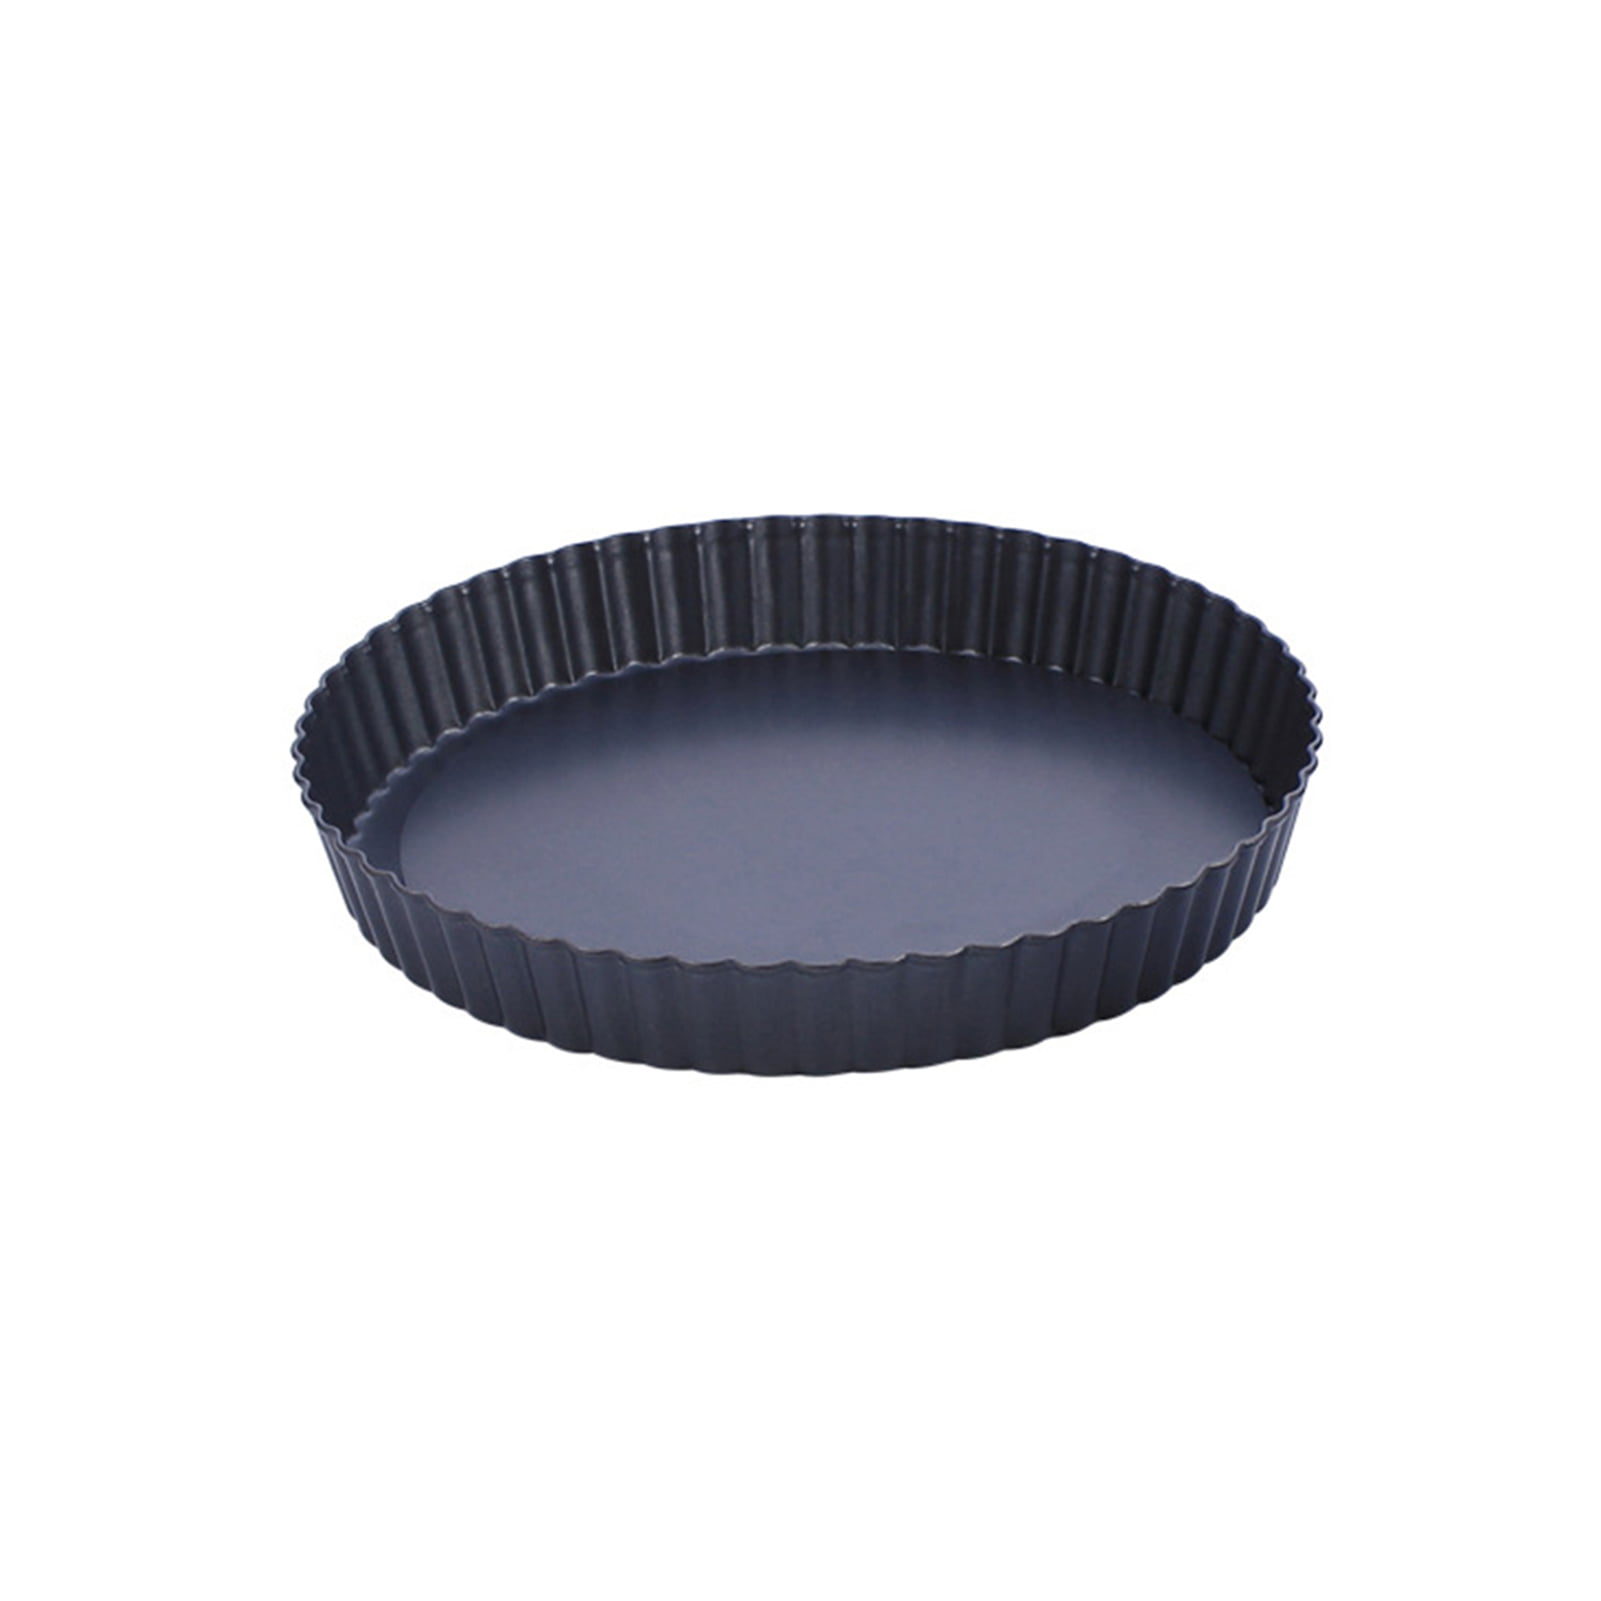 Details about   11 inch Baking Pizza Pan Round Tray With Hole Carbon Steel Bakeware Kitchen Tool 